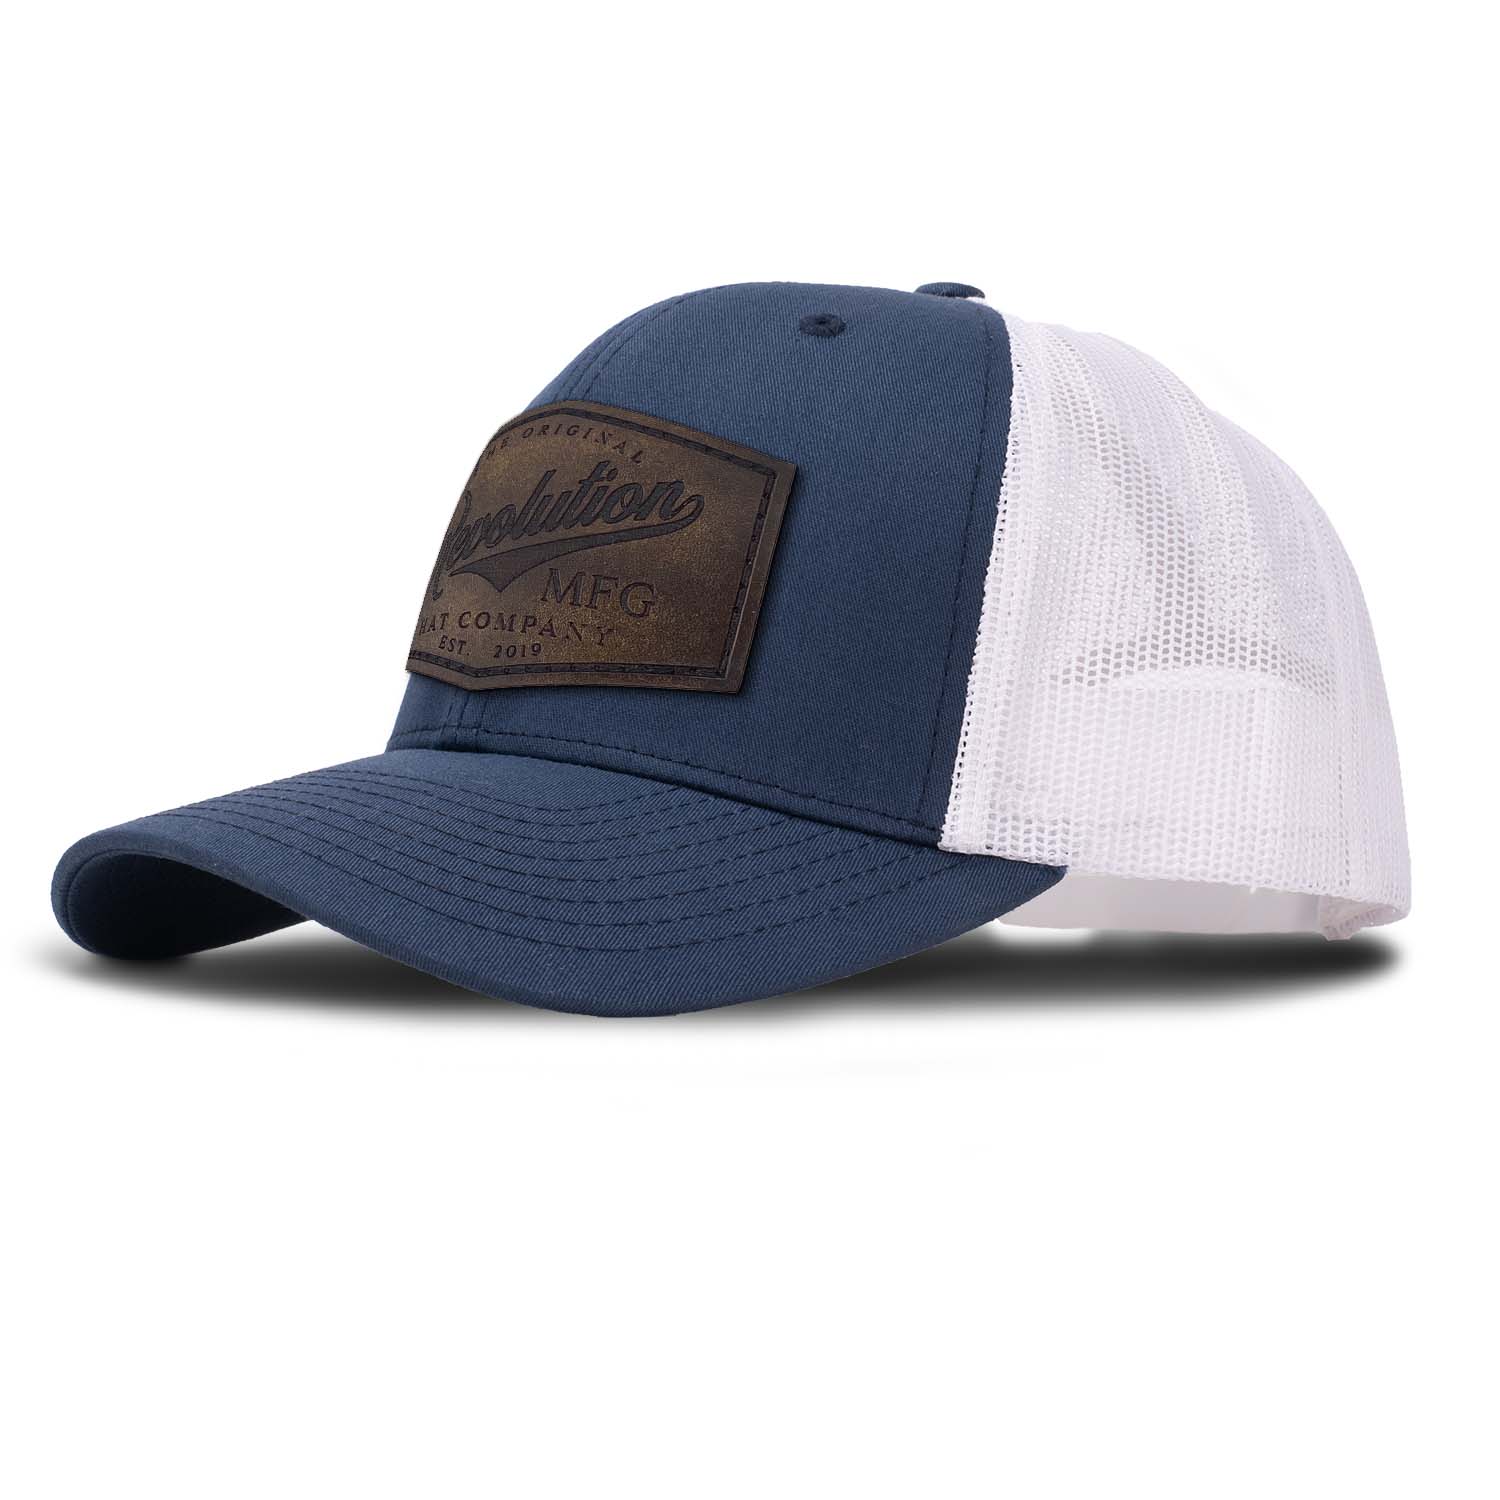 Revolution Mfg Hat Co full grain leather patch on a classic navy trucker hat with white mesh